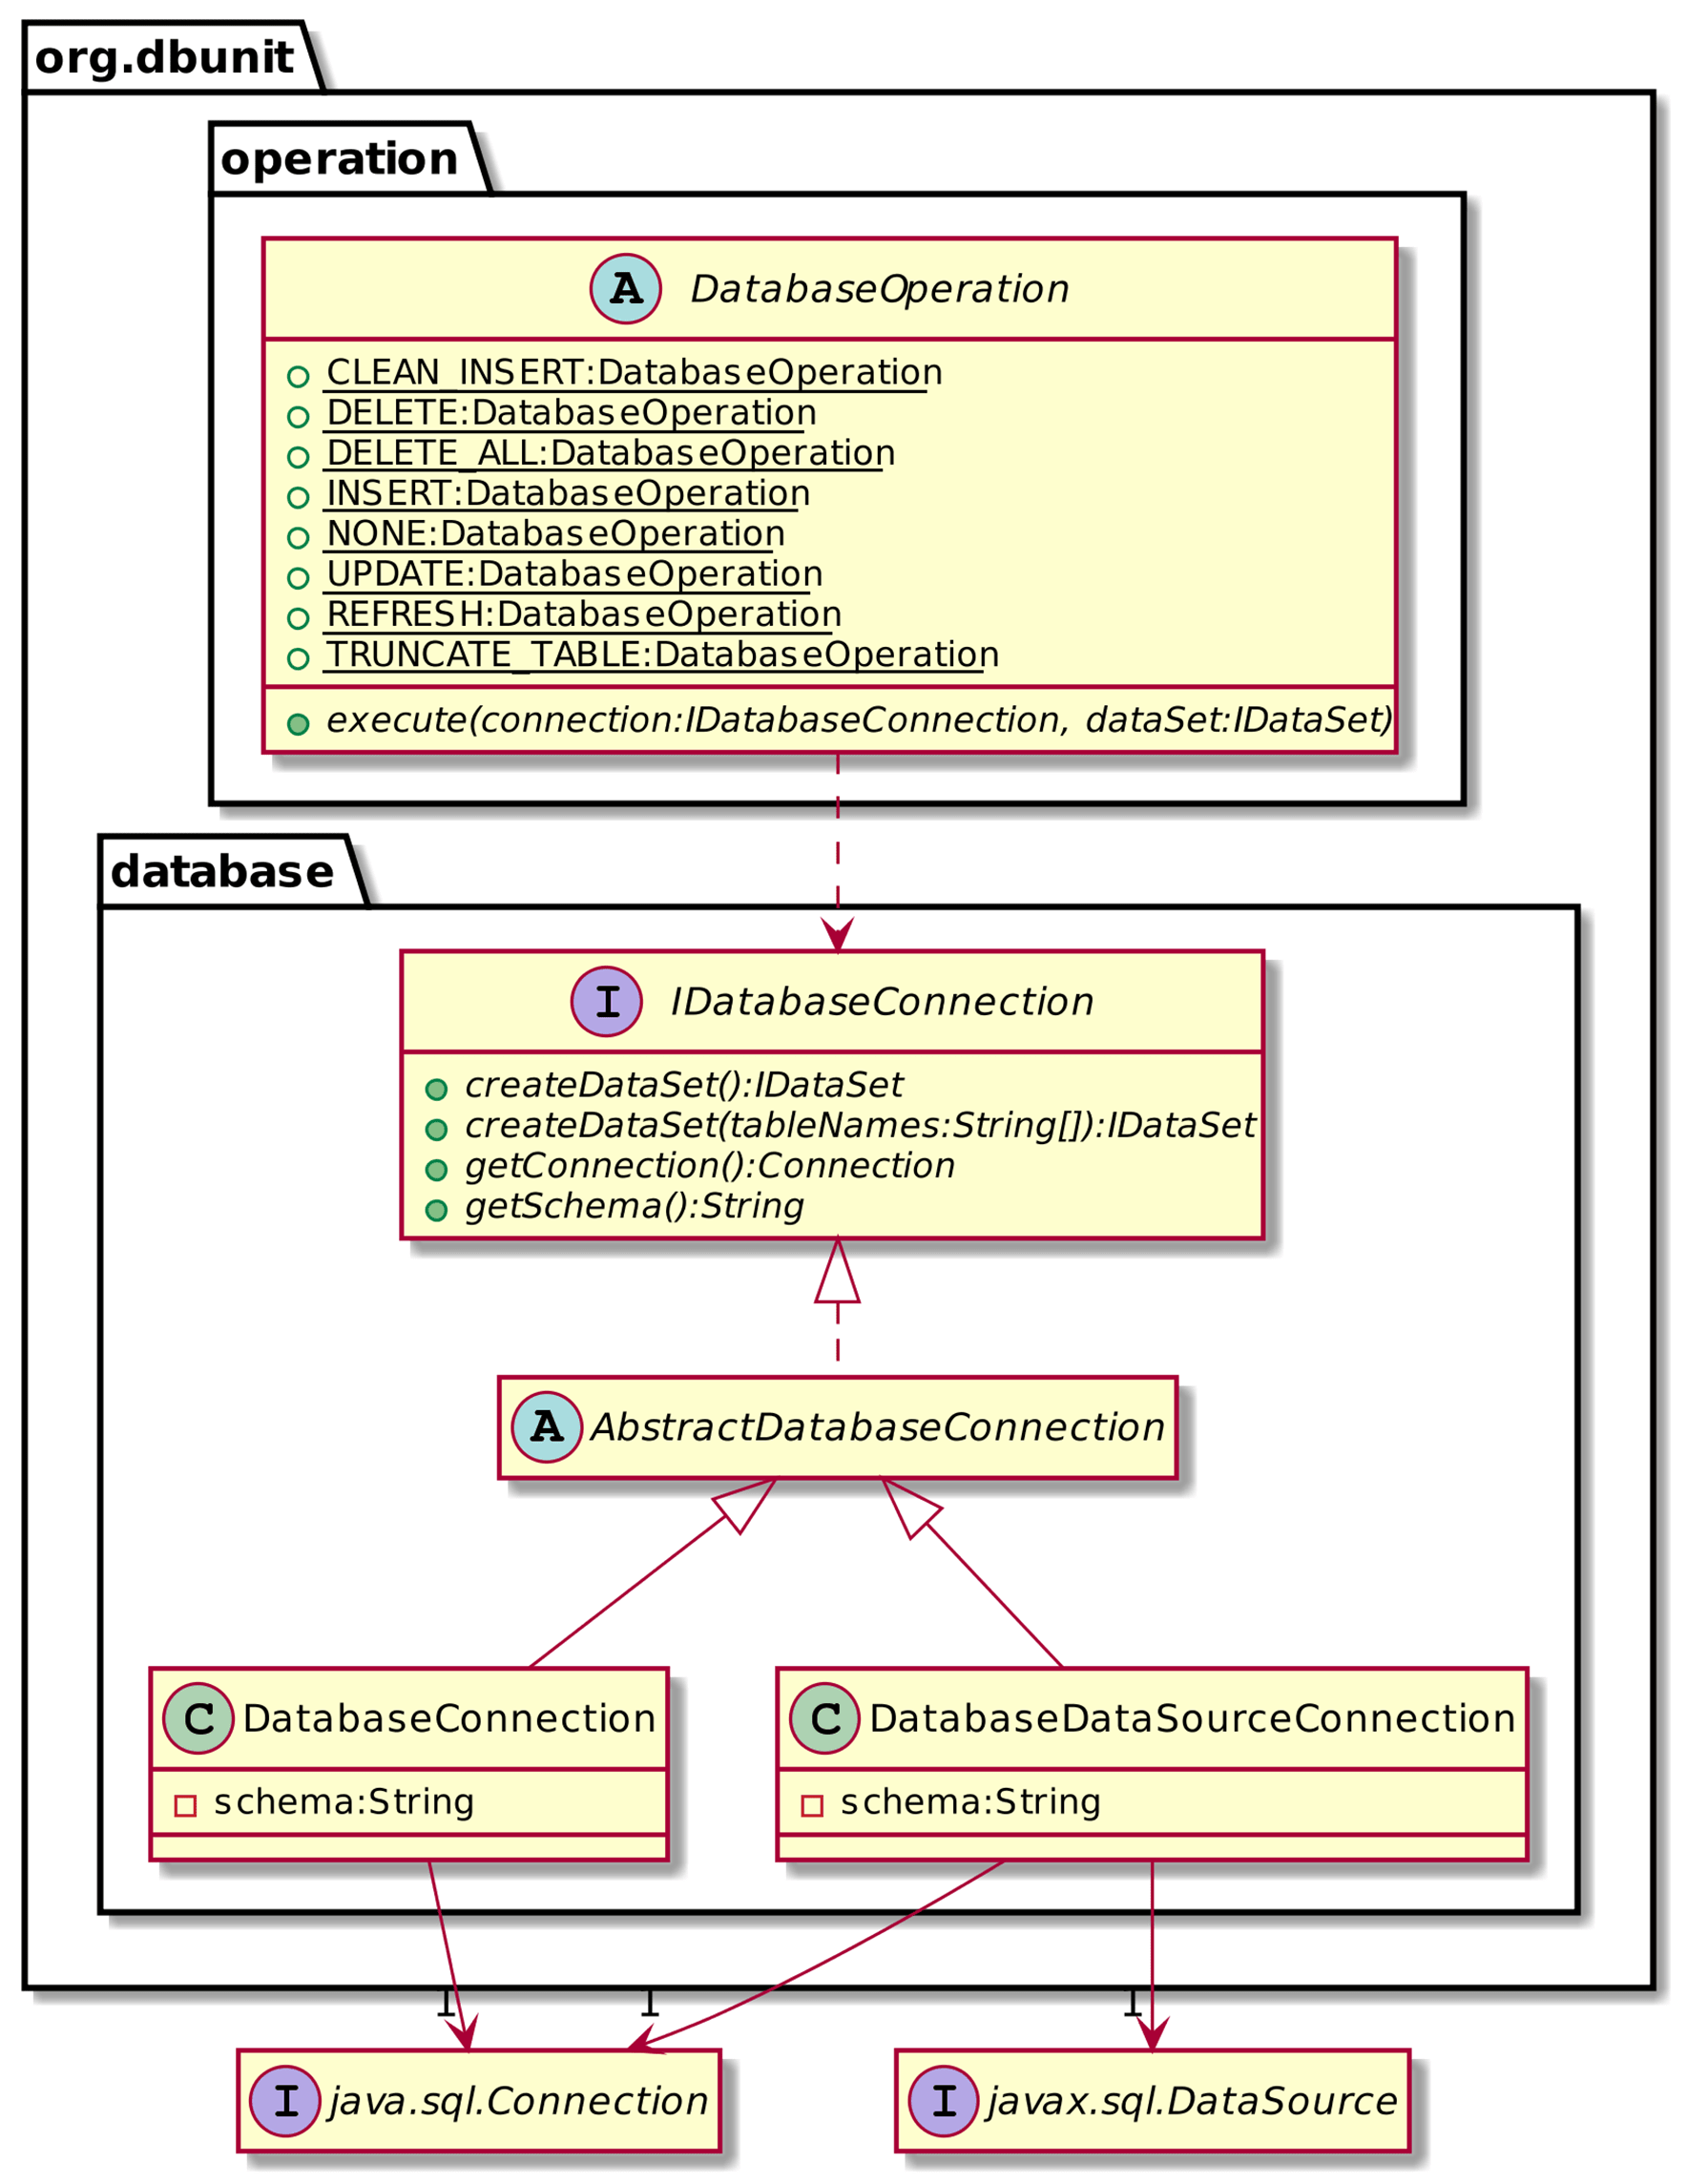 Fig. 5.6 - Connection and operation class hierarchy